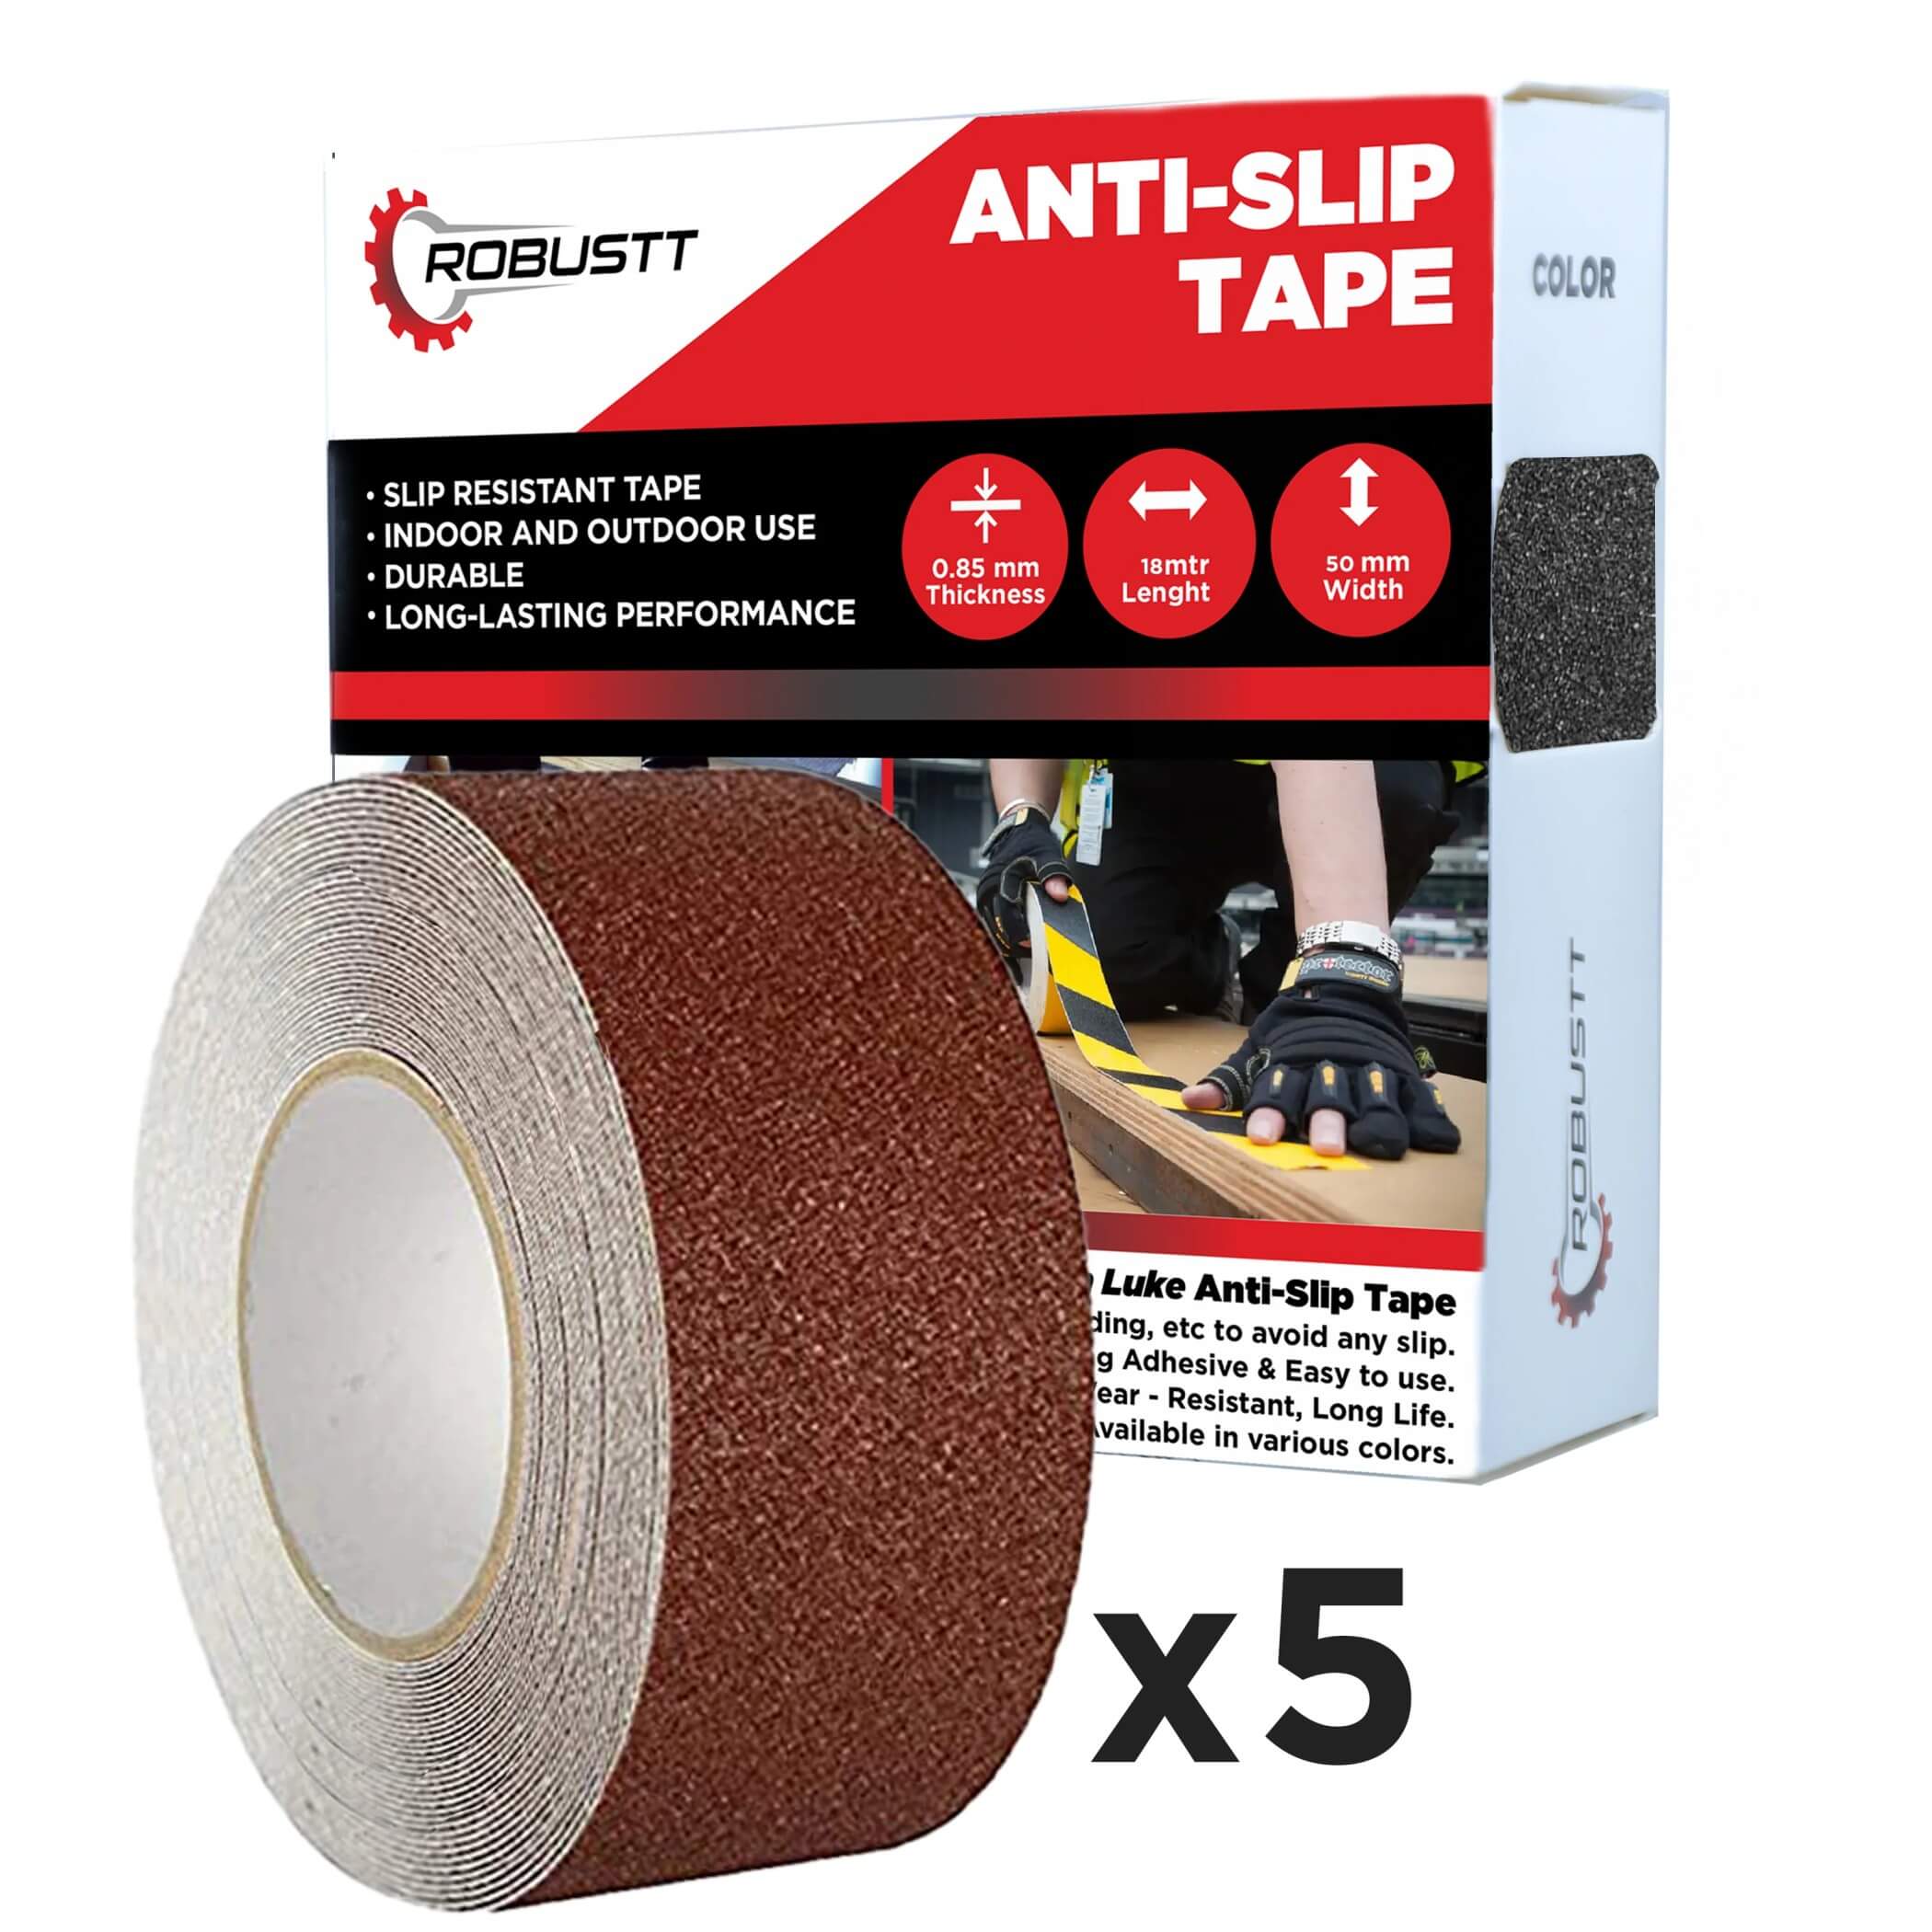 robustt-anti-skid-antislip-18mtr-guaranteed-x50mm-brown-fall-resistant-with-pet-material-and-solvent-acrylic-adhesive-tape-pack-of-5